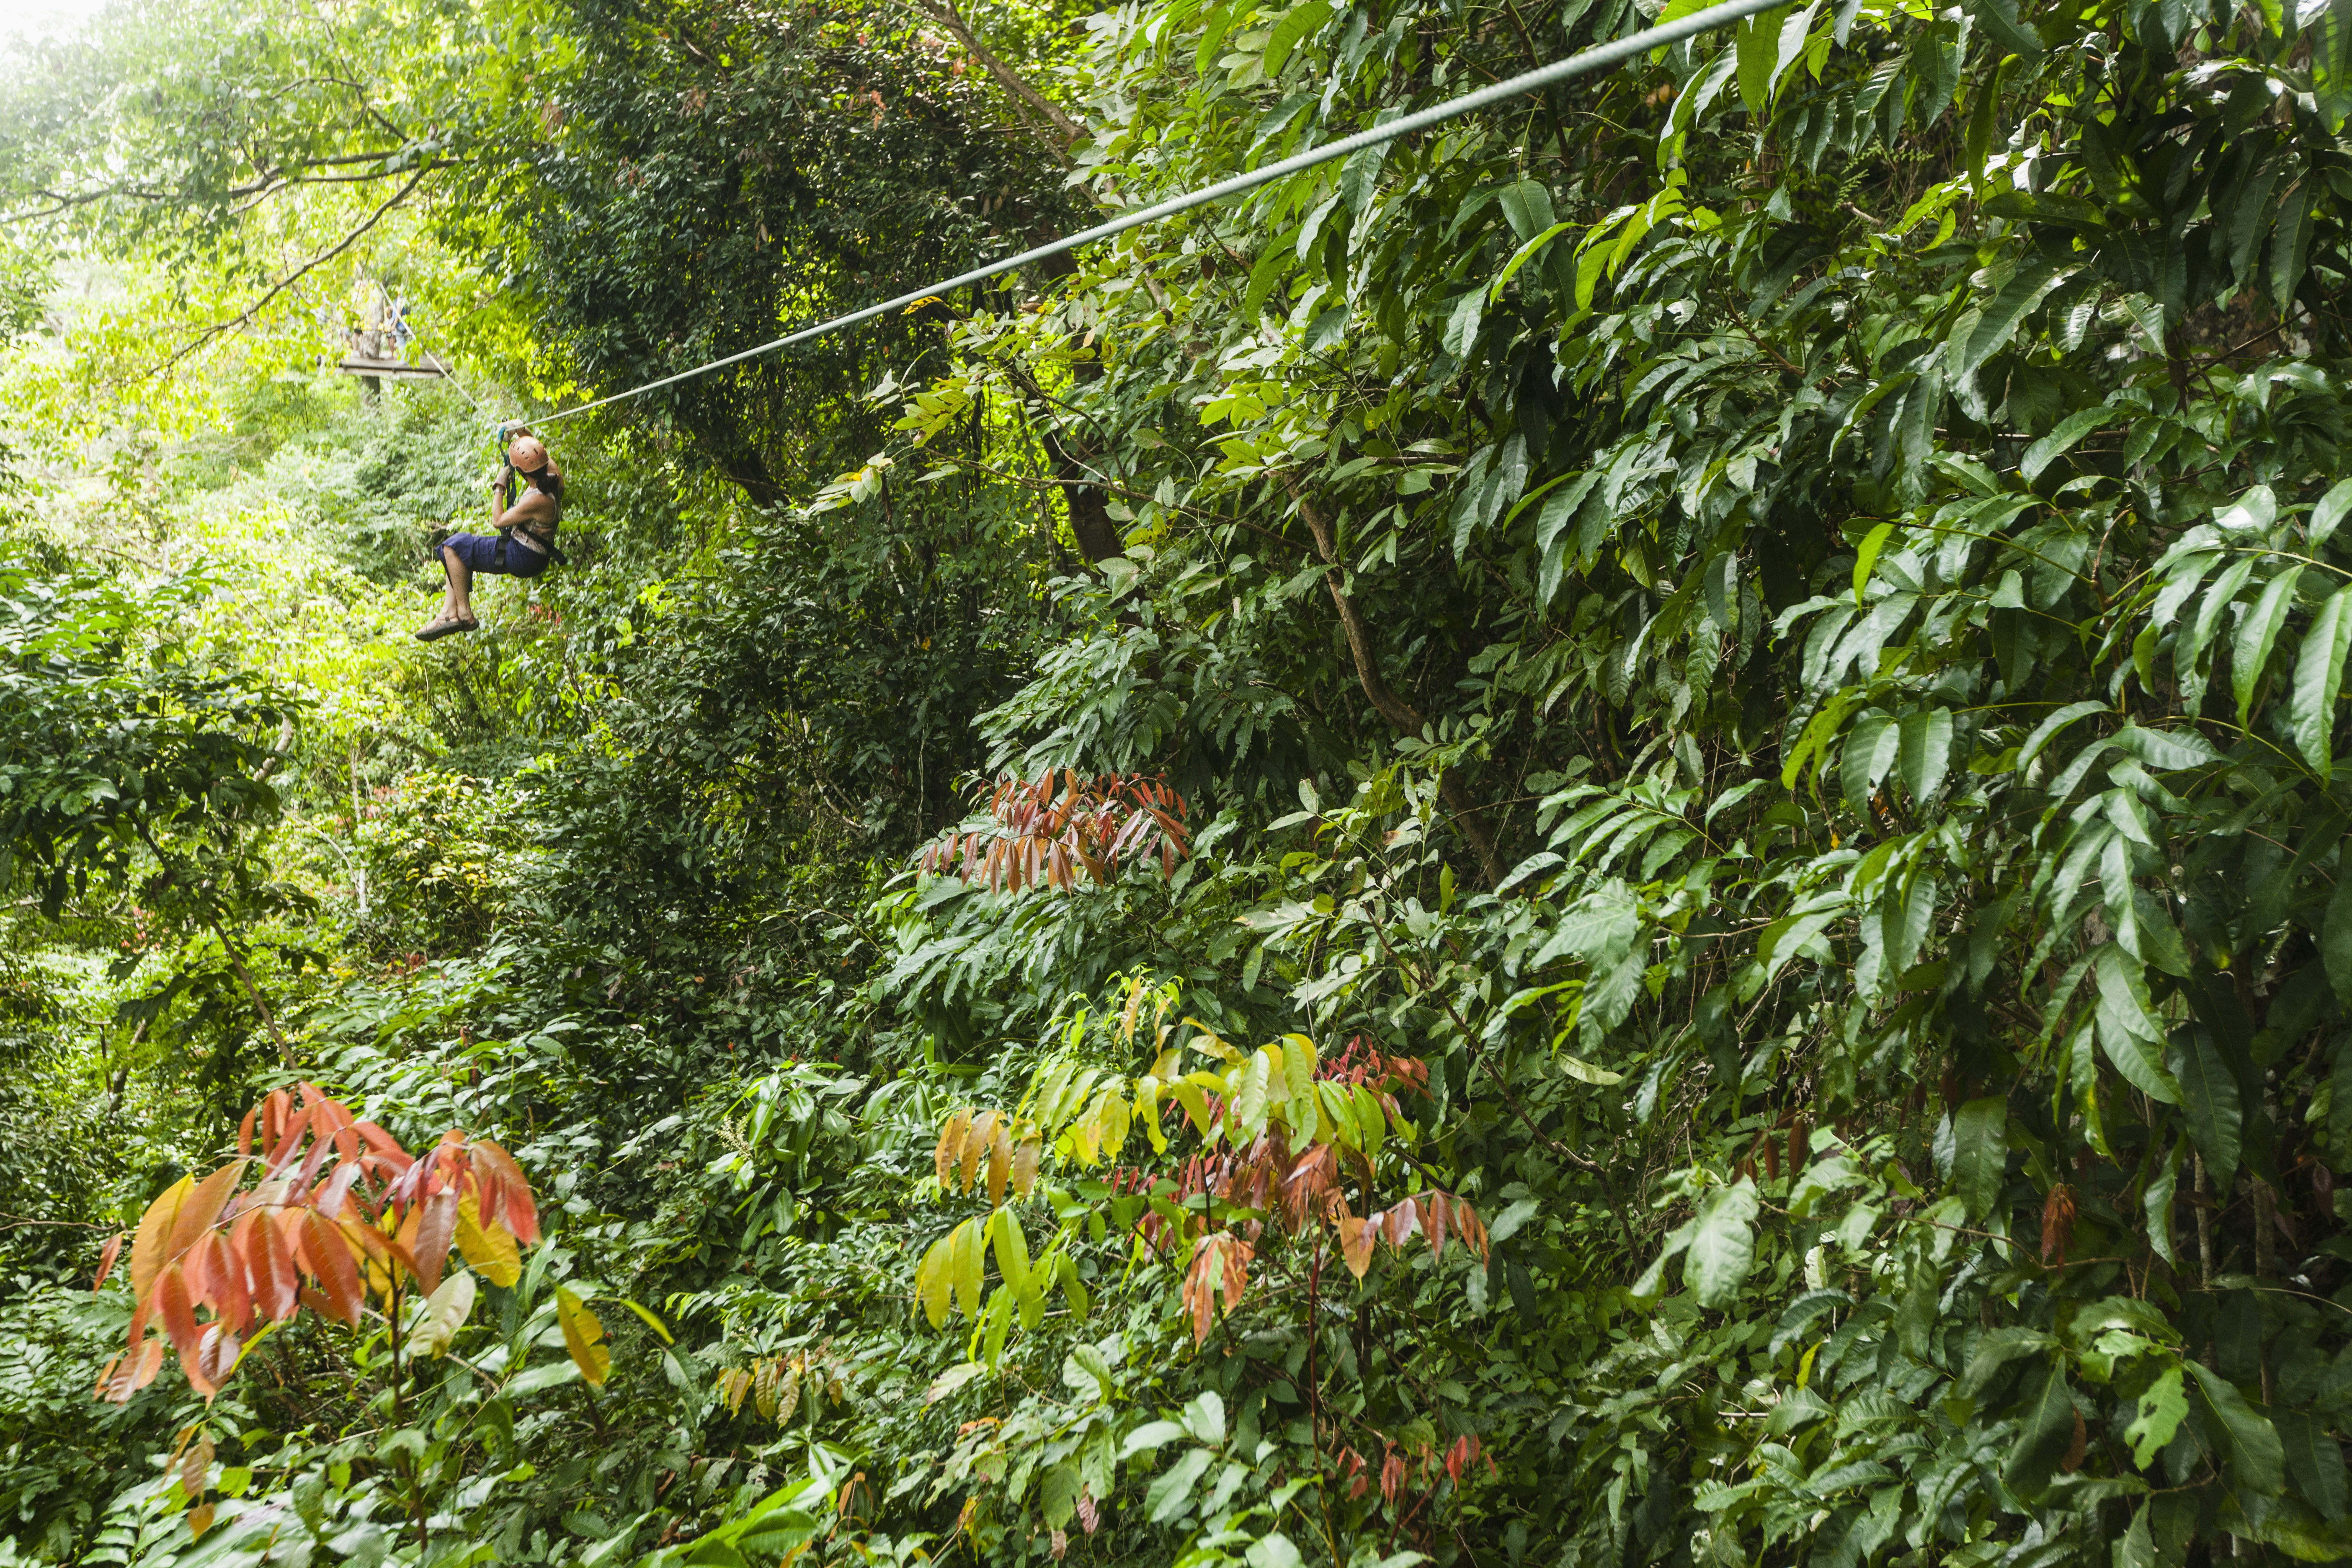 A young lady zooms along a zipline through the forest towards a platform in the distance